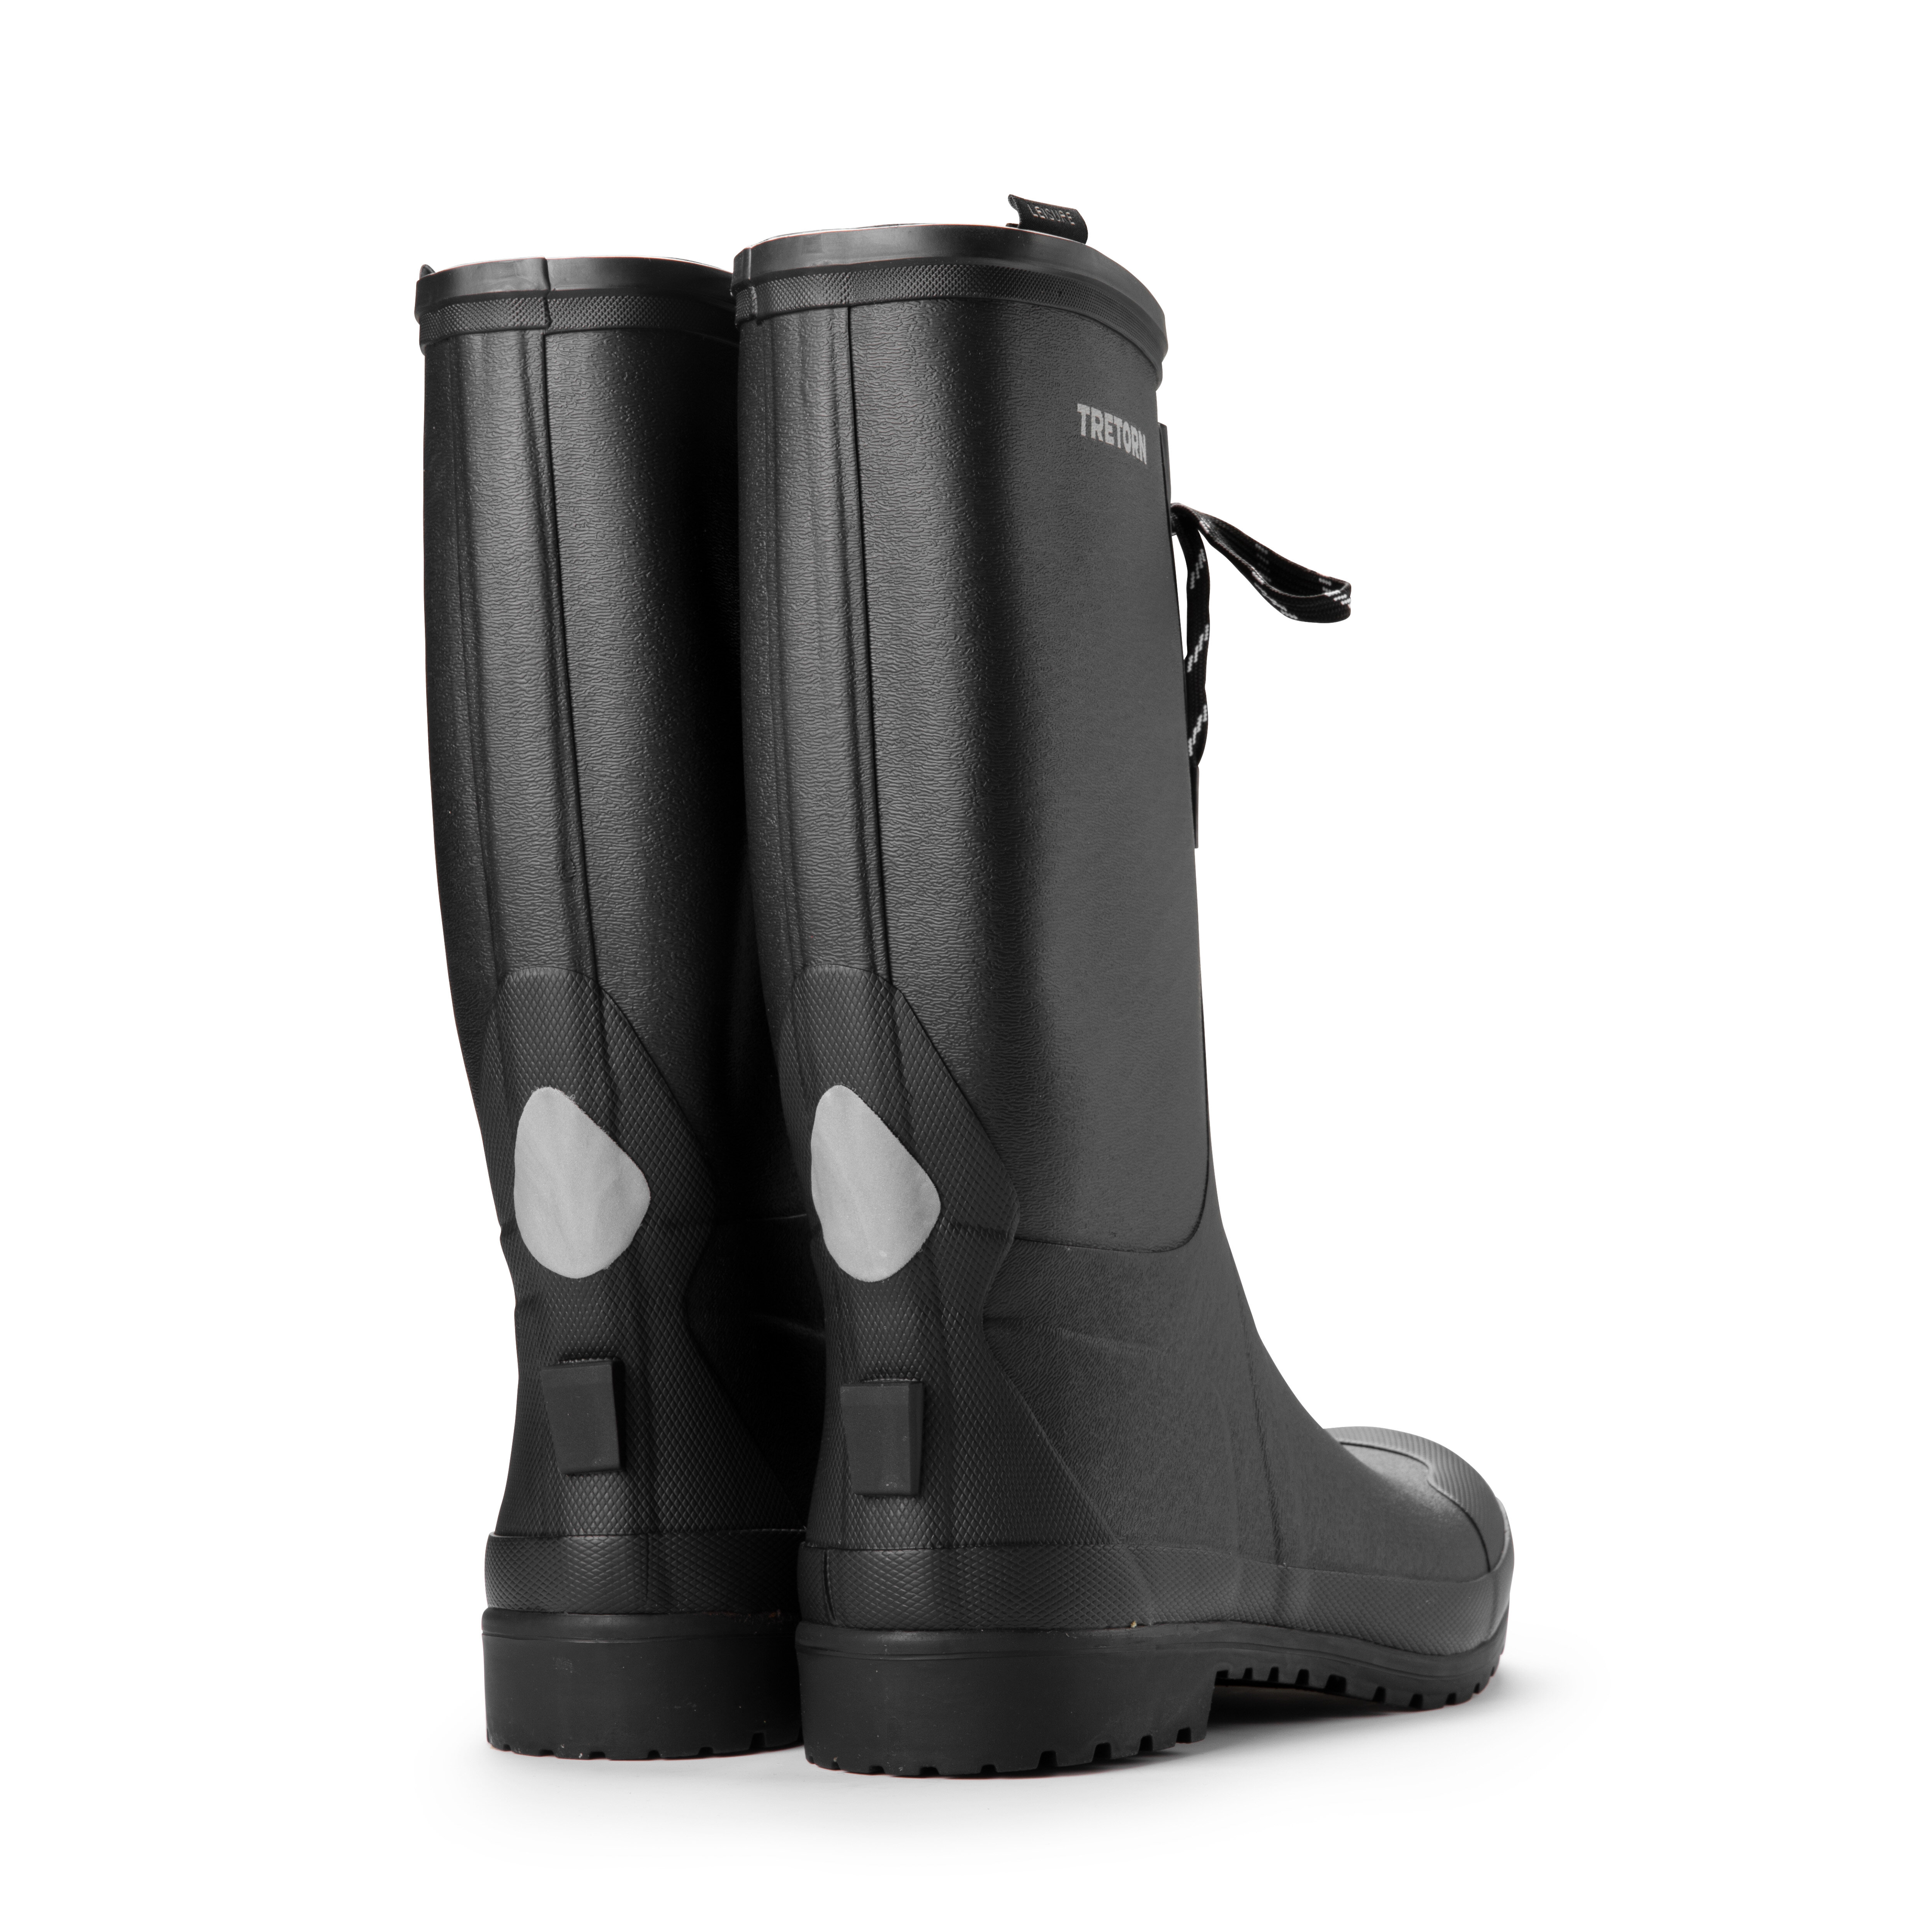 STRONG S RUBBER BOOT